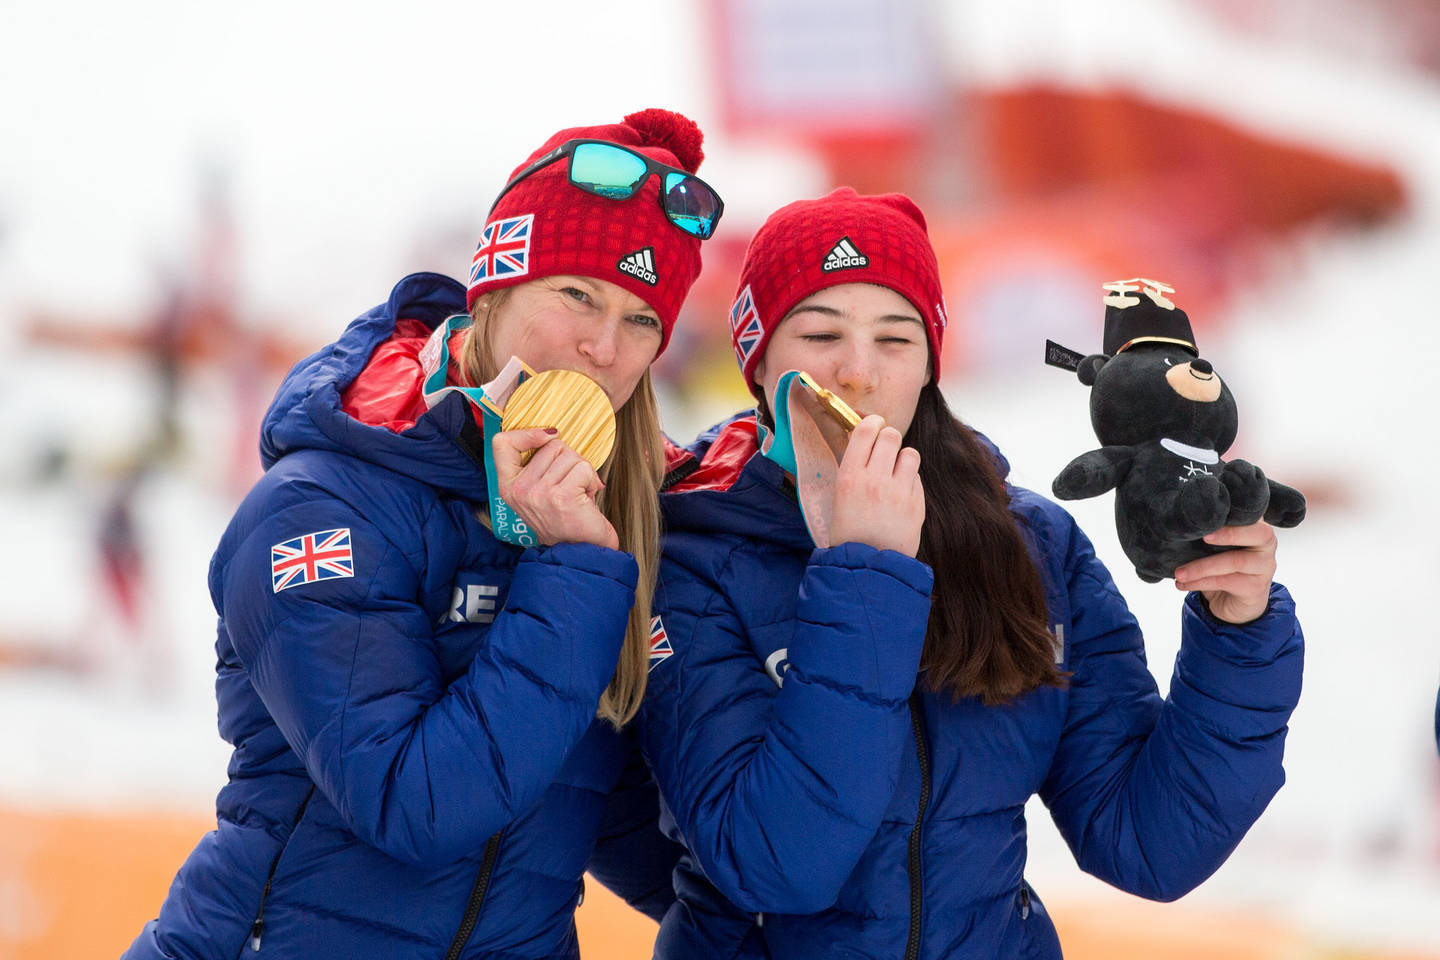 Menna and Jennifer with their gold medals